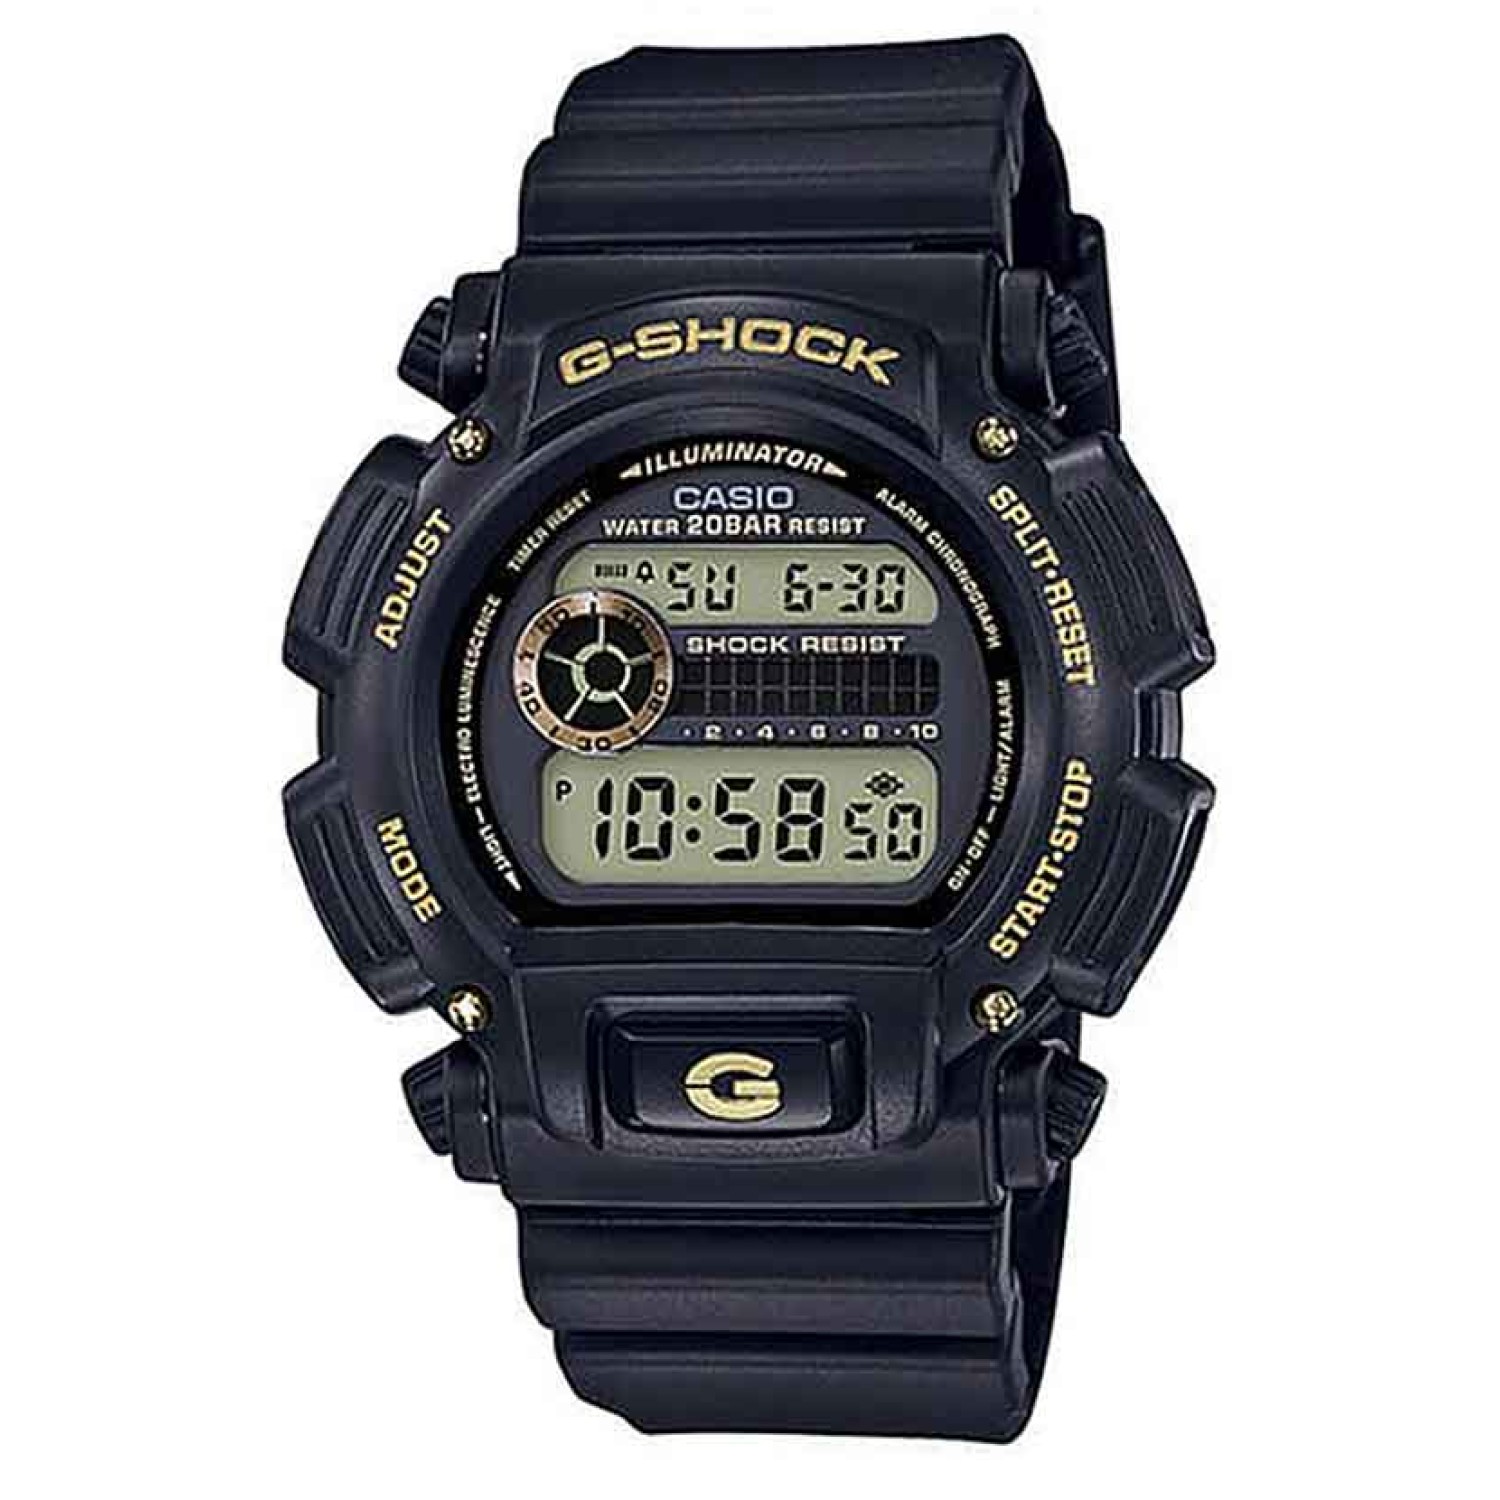 DW9052GBX-1A9 G-Shock Black and Yellow Collection Watch. G-Shock Japan have released  the GBX series in September 2017, a six-piece collection featuring three pairs of classic models with complementary black/gold and black/rose gold colour schemes. Availa